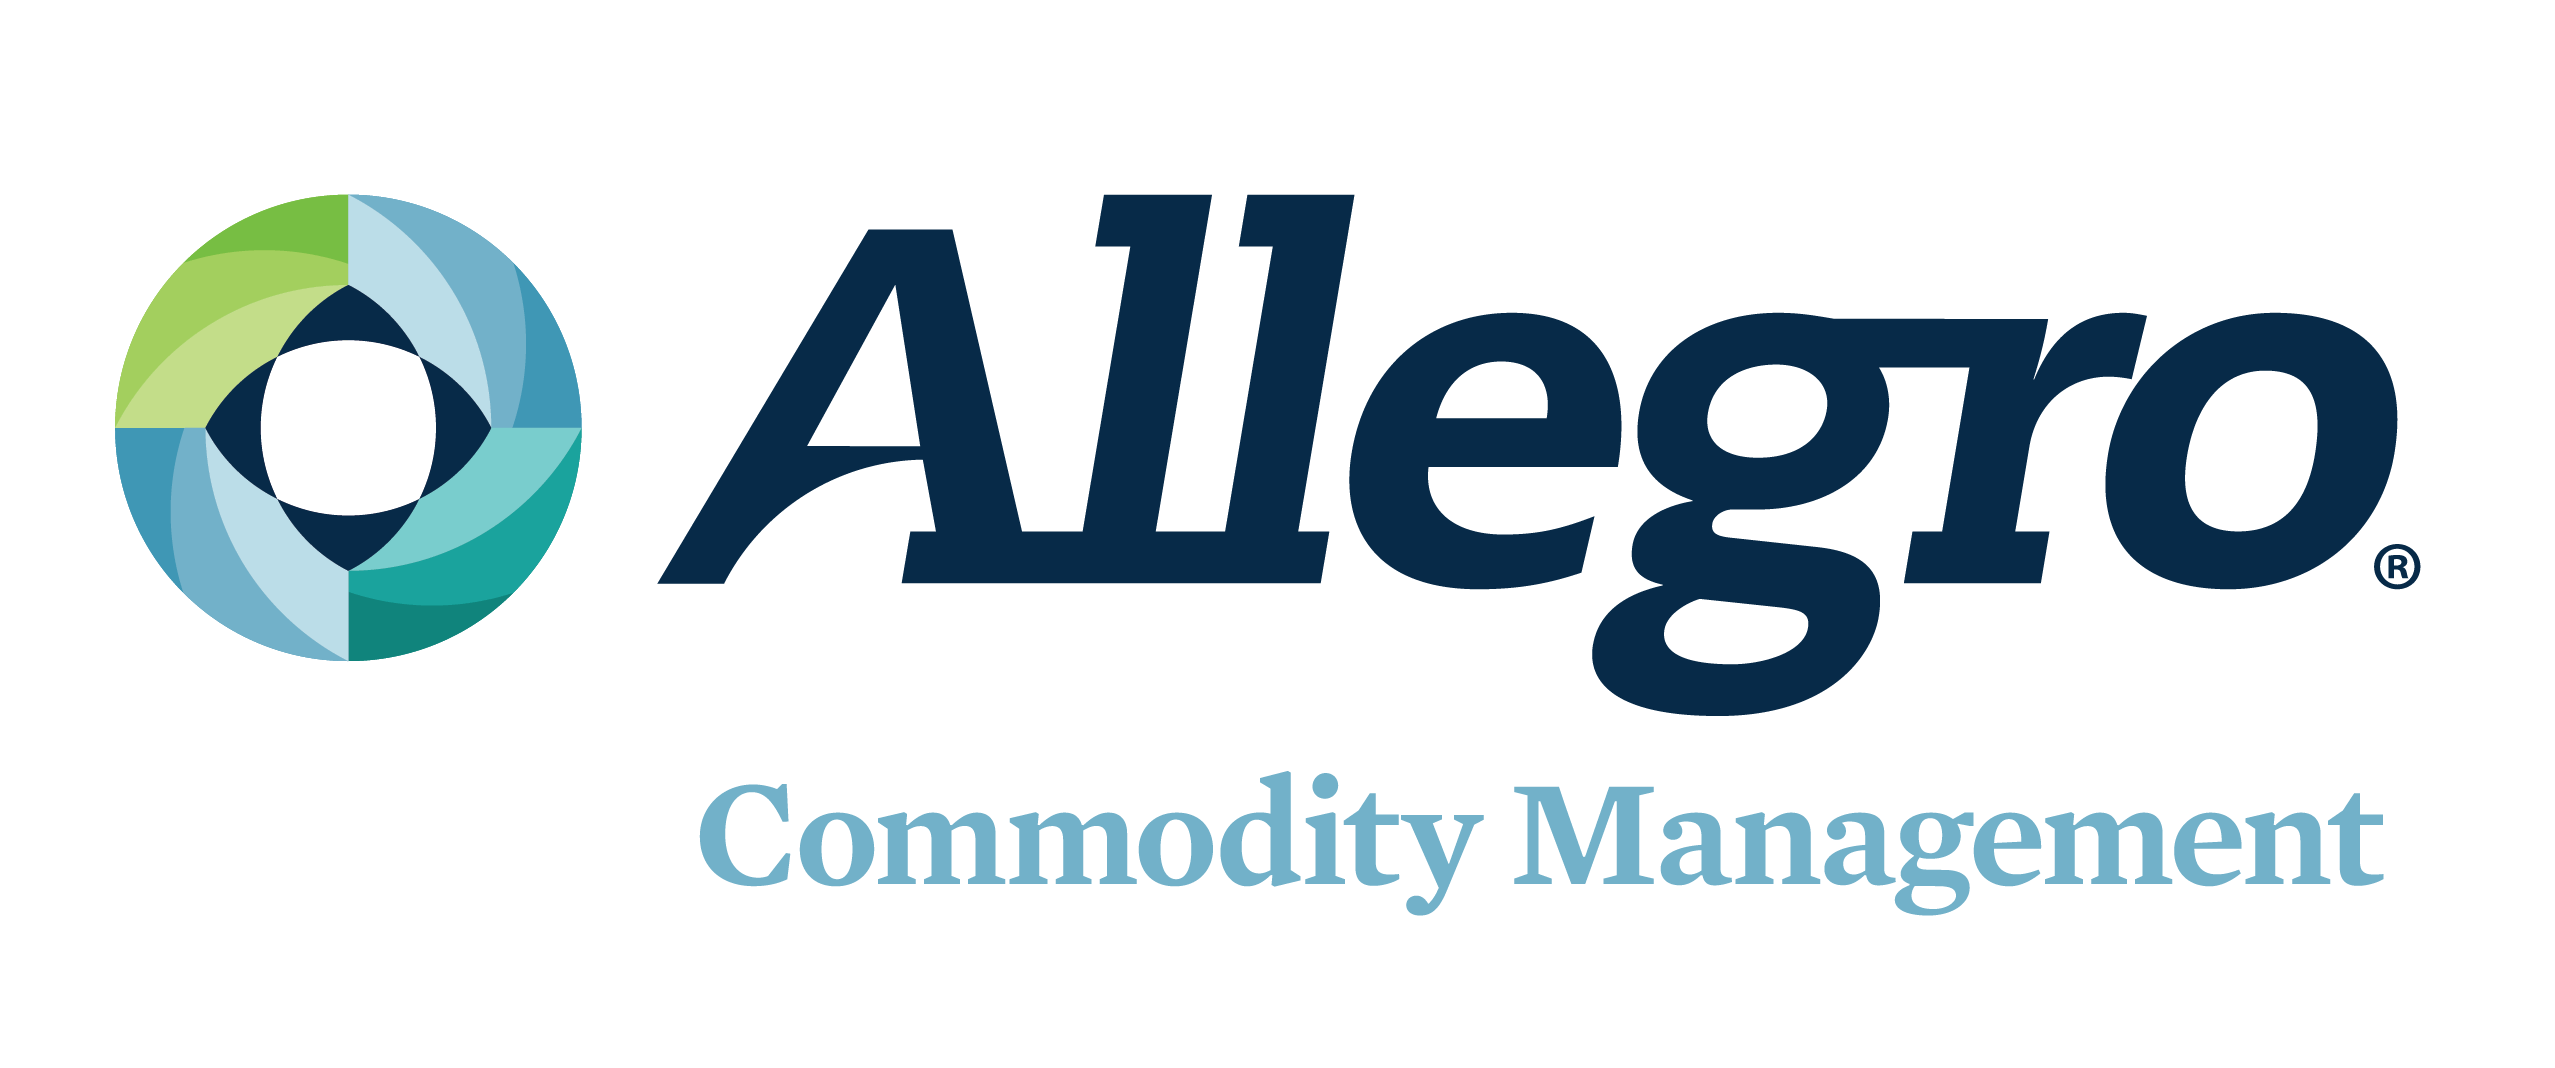 Allegro Logo - CTRM & ETRM Software For Commodity Trading & Risk Management